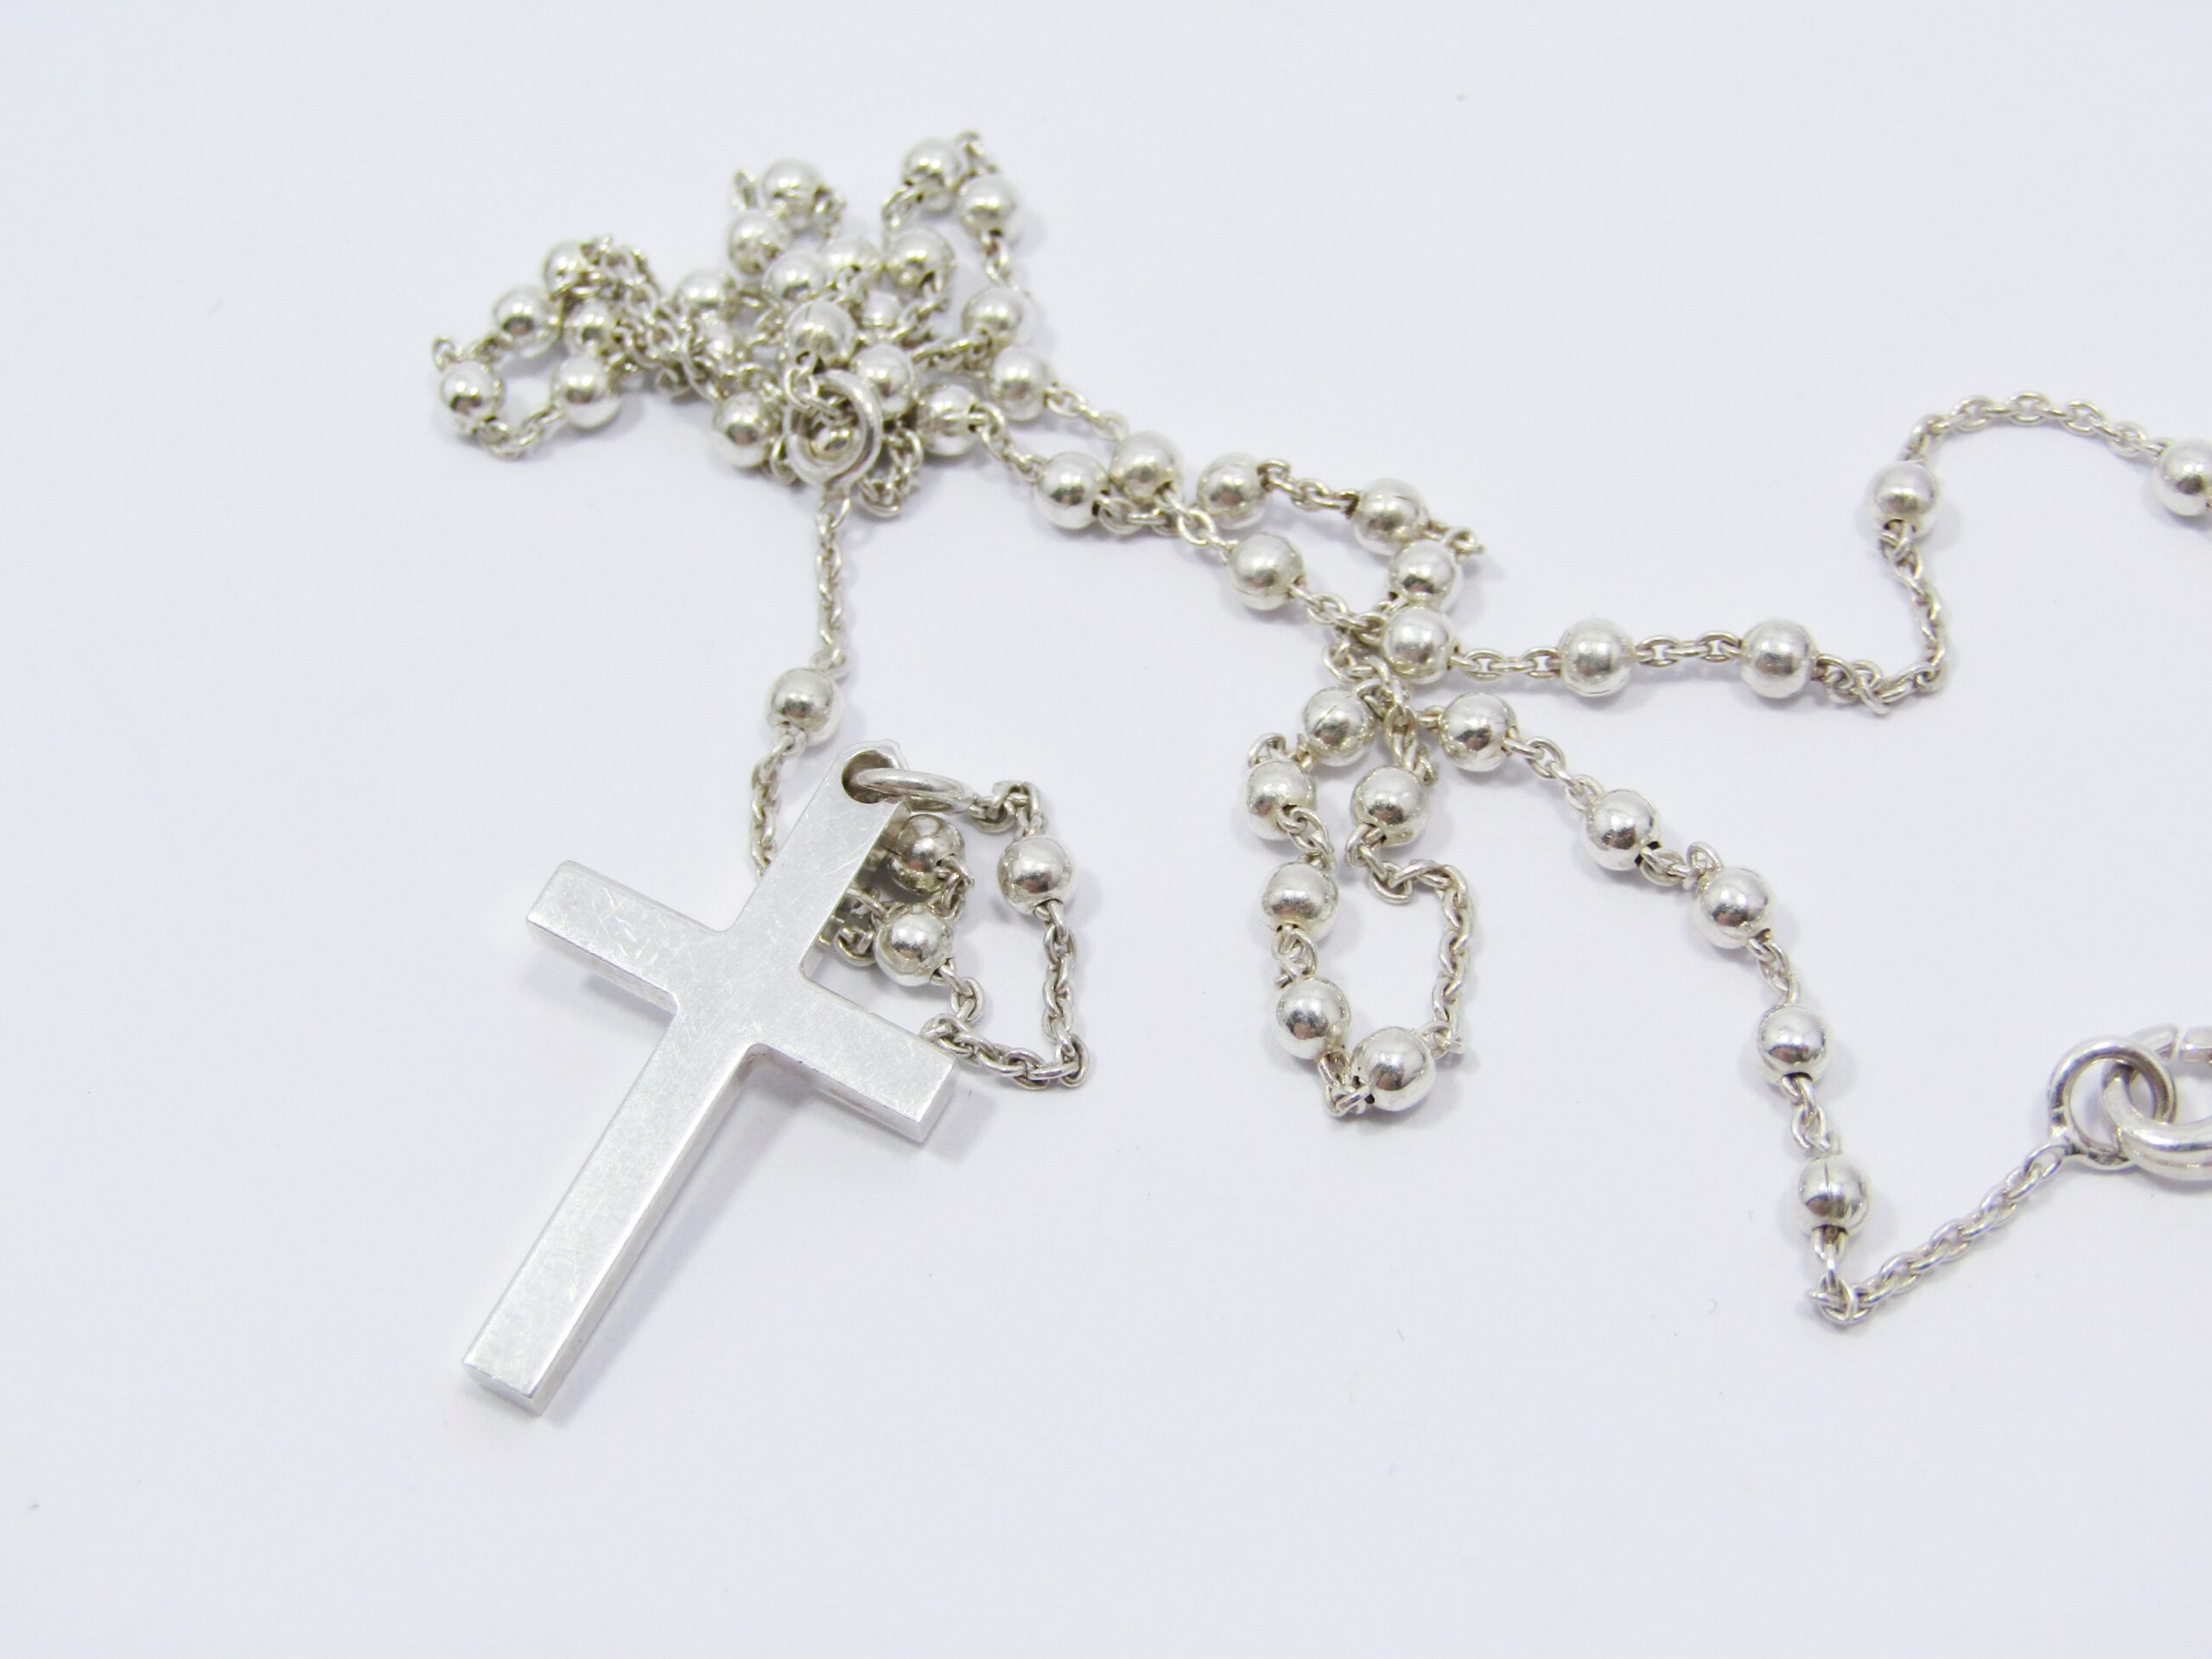 A Gorgeous Dainty Rosary in Sterling Silver.